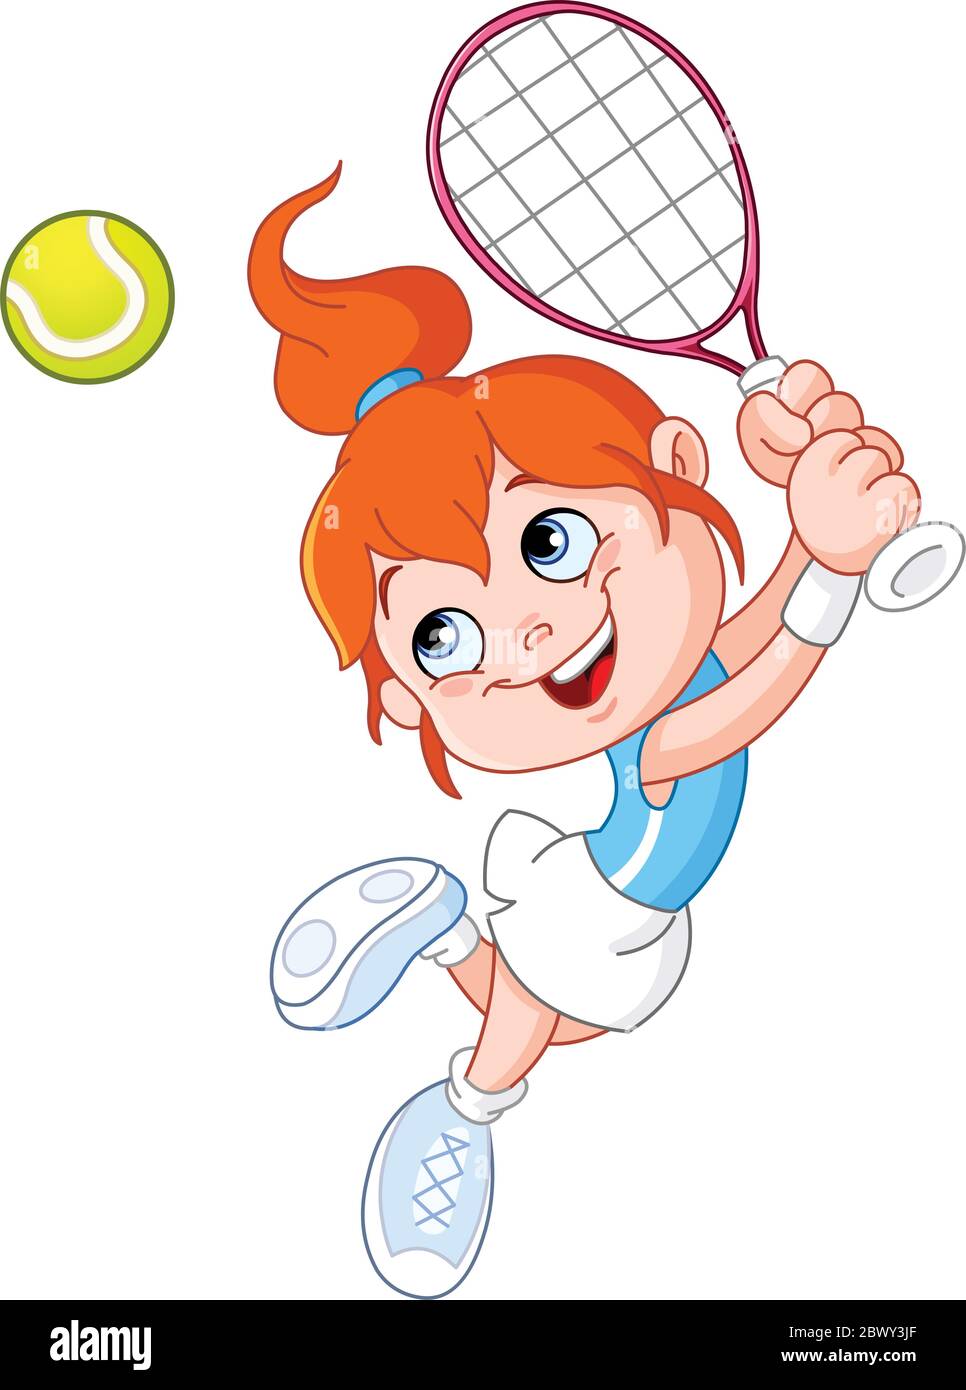 Young girl playing tennis Stock Vector